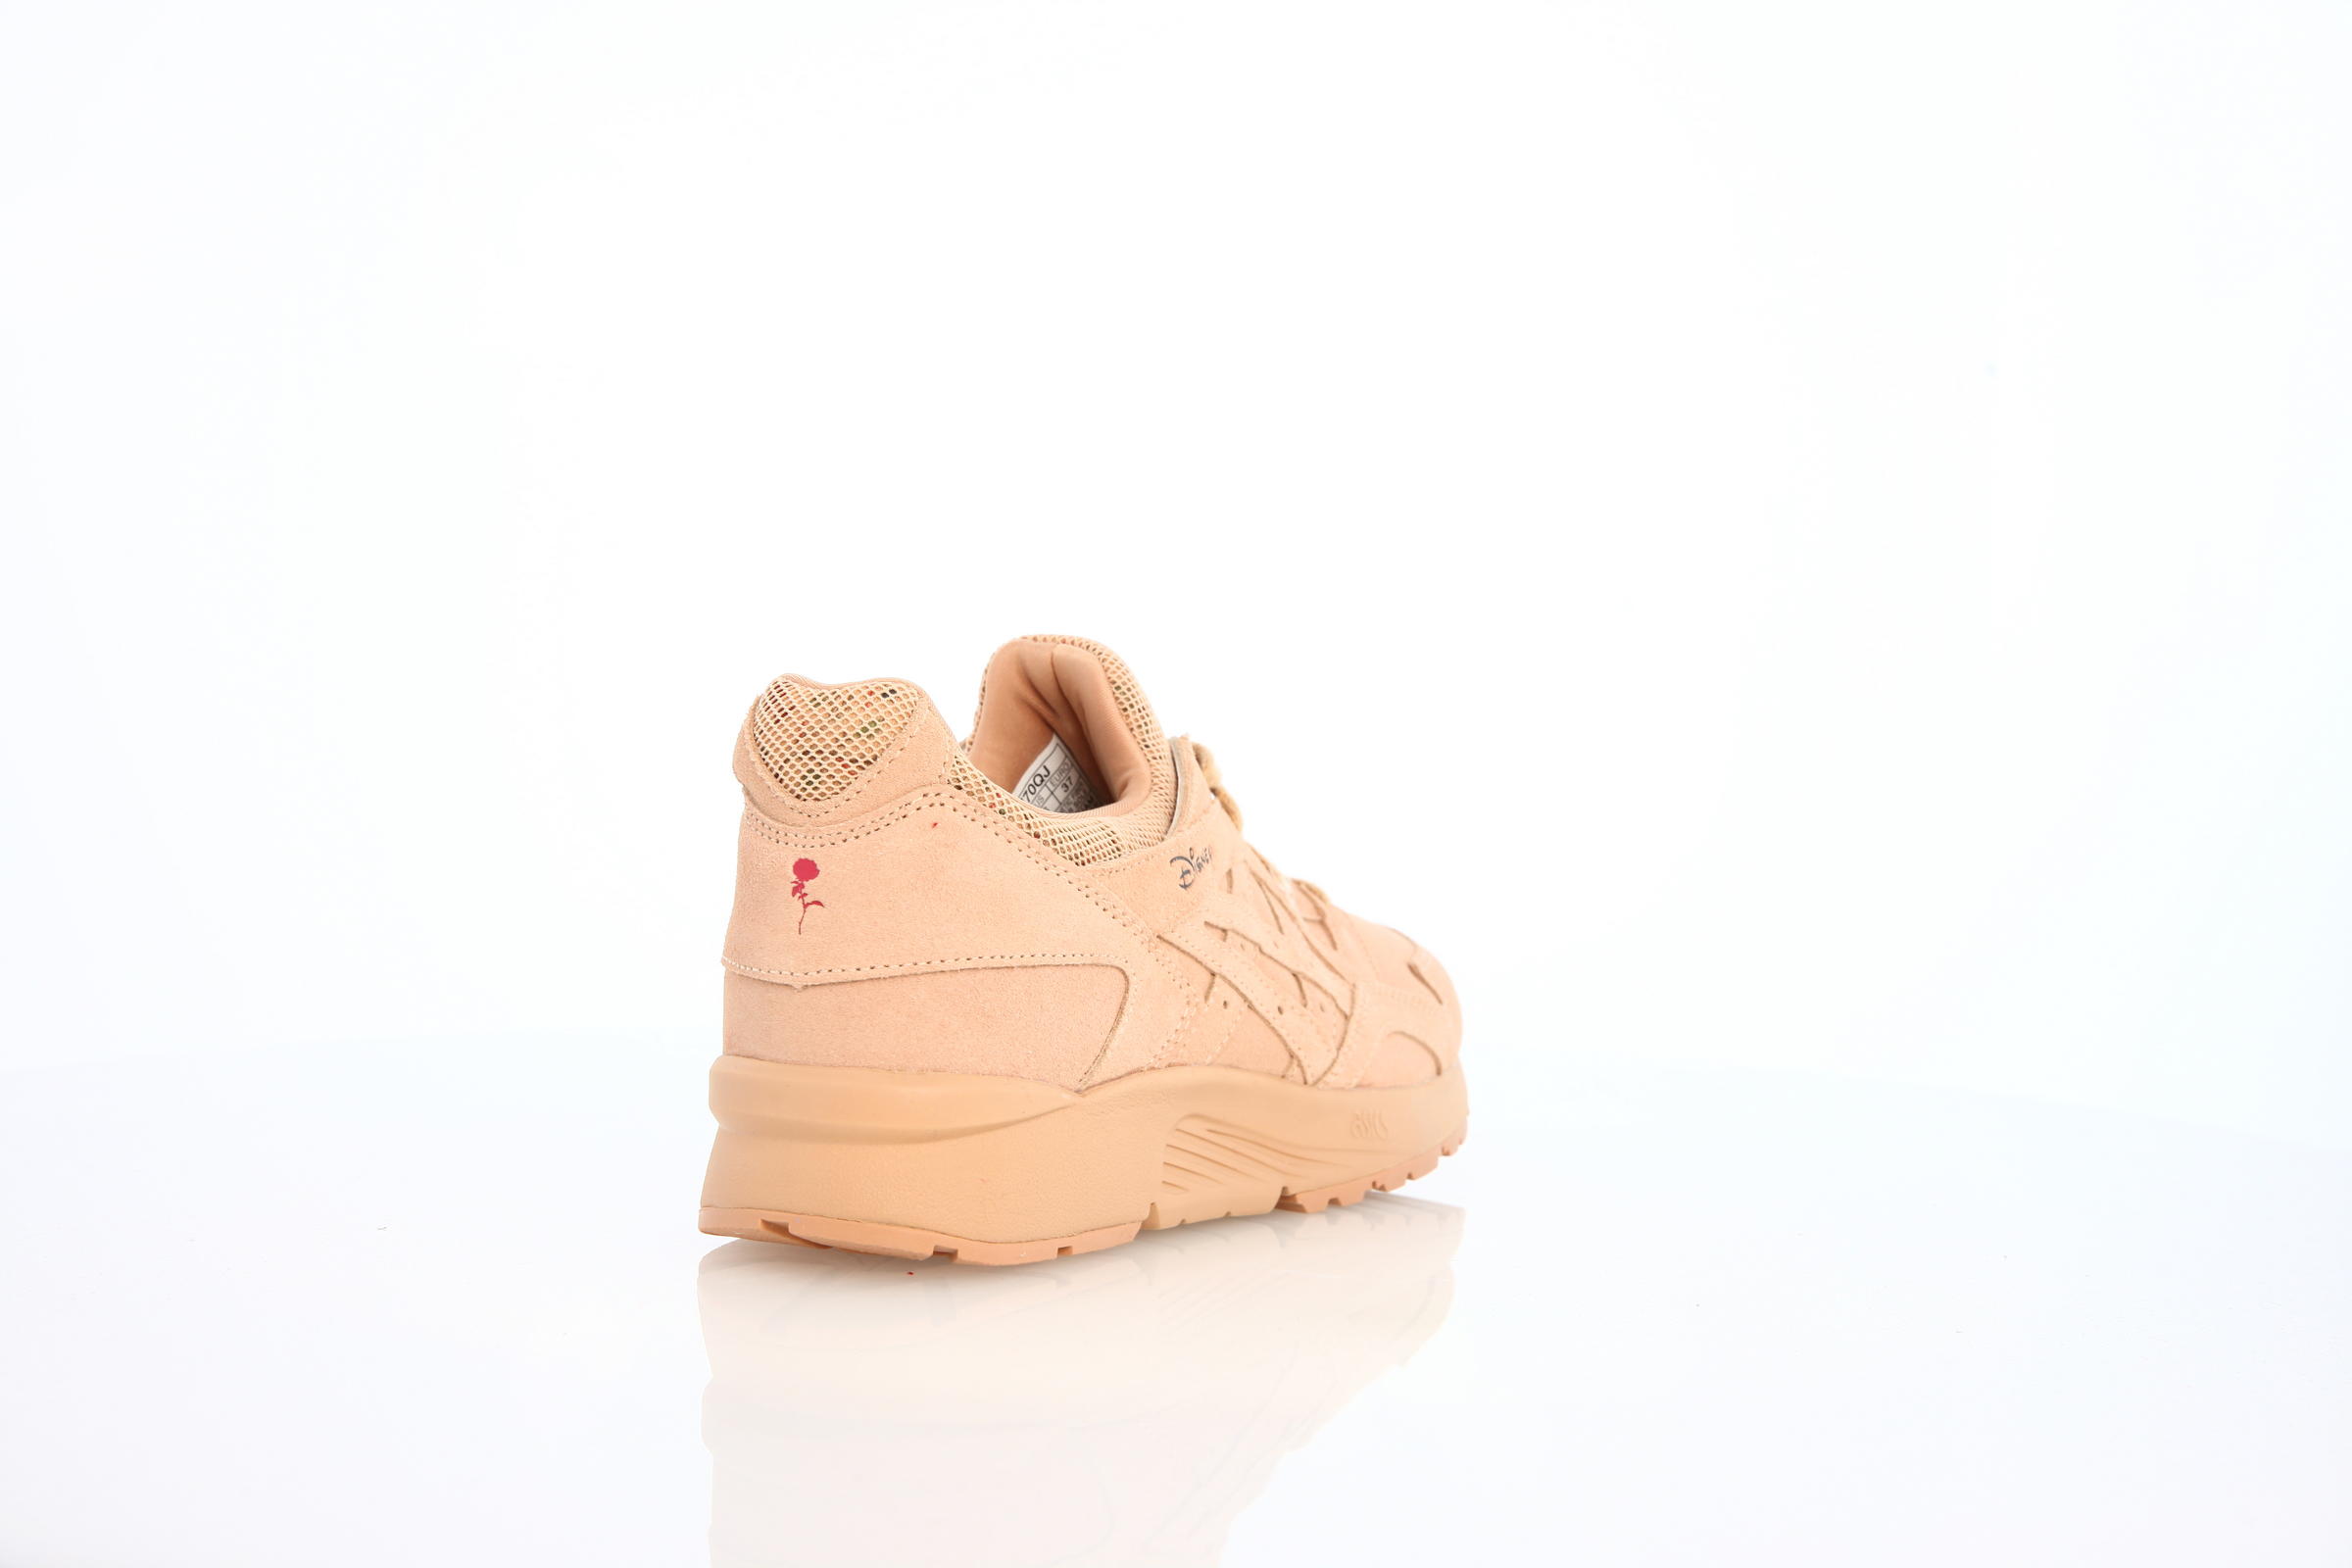 Asics Gel Lyte V Beauty and the Beast "Bleached Apricot"